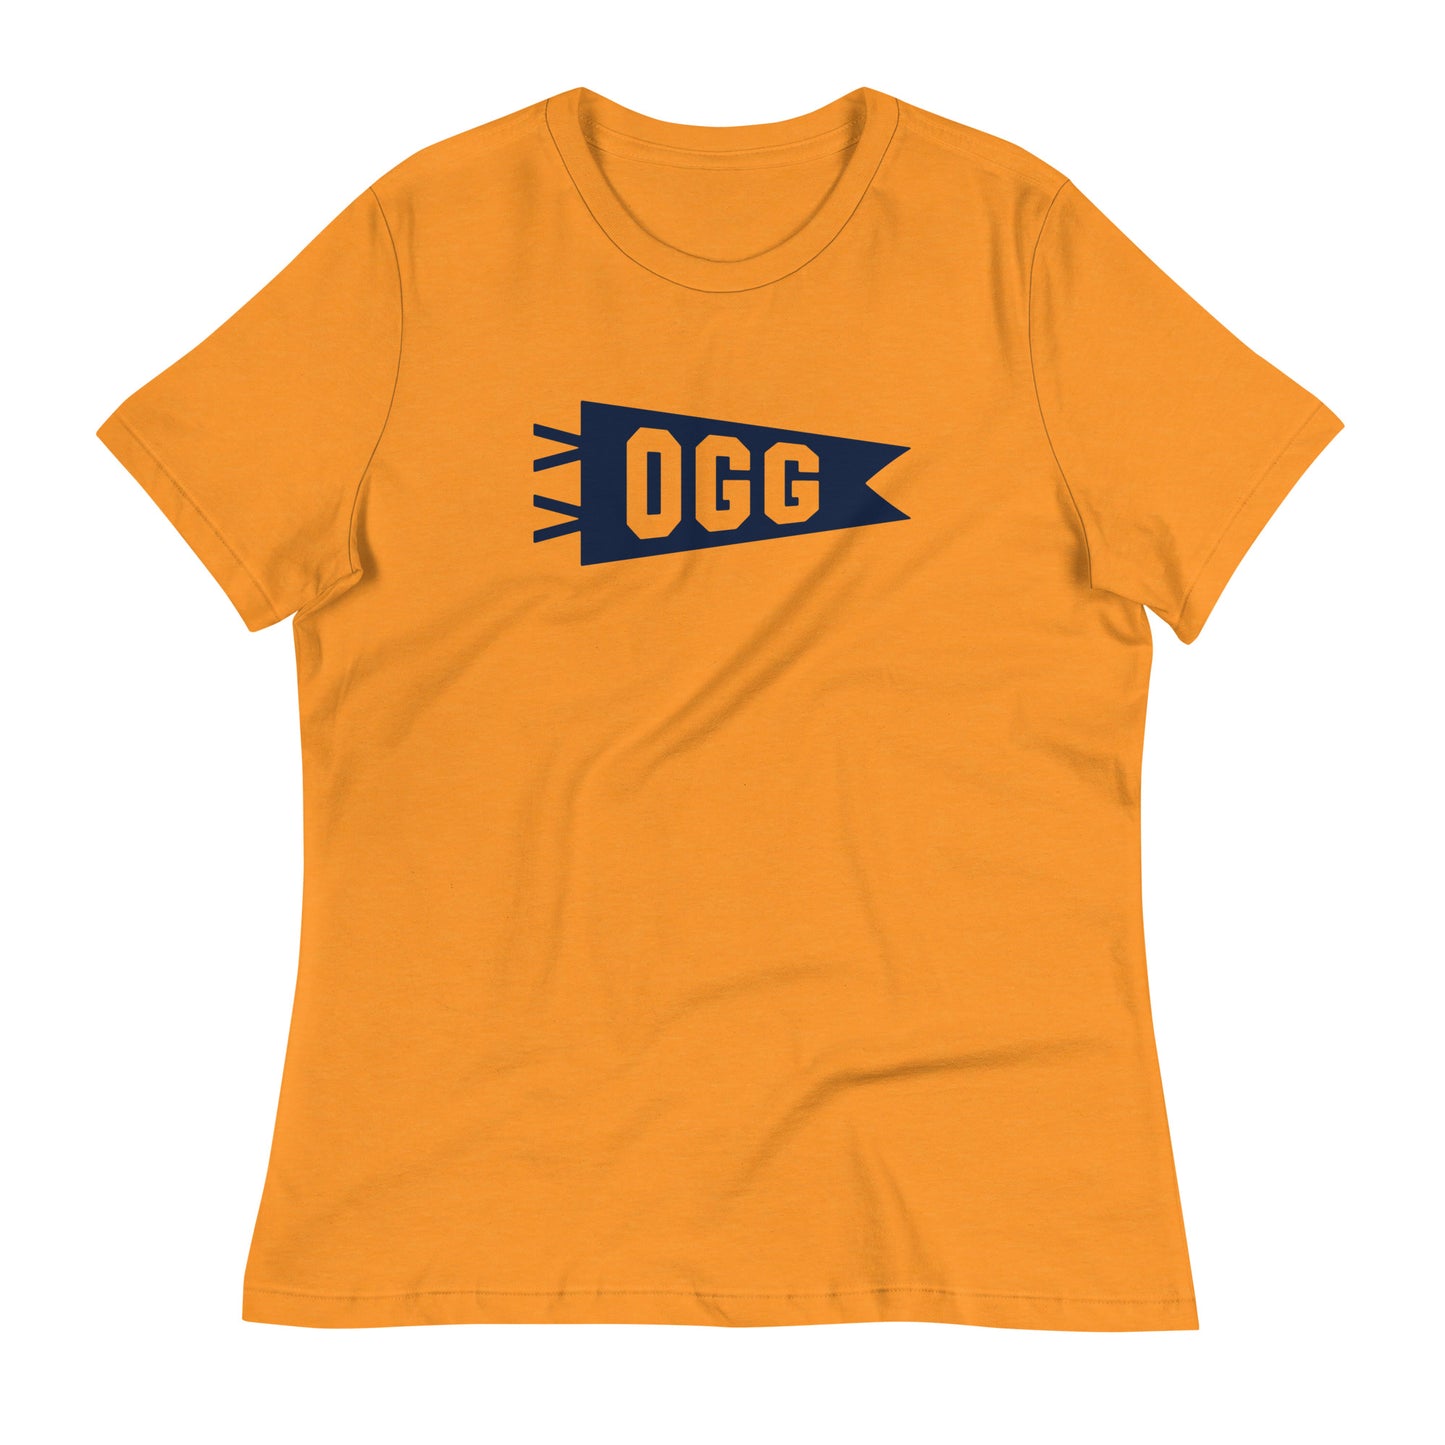 Airport Code Women's Tee - Navy Blue Graphic • OGG Maui • YHM Designs - Image 01